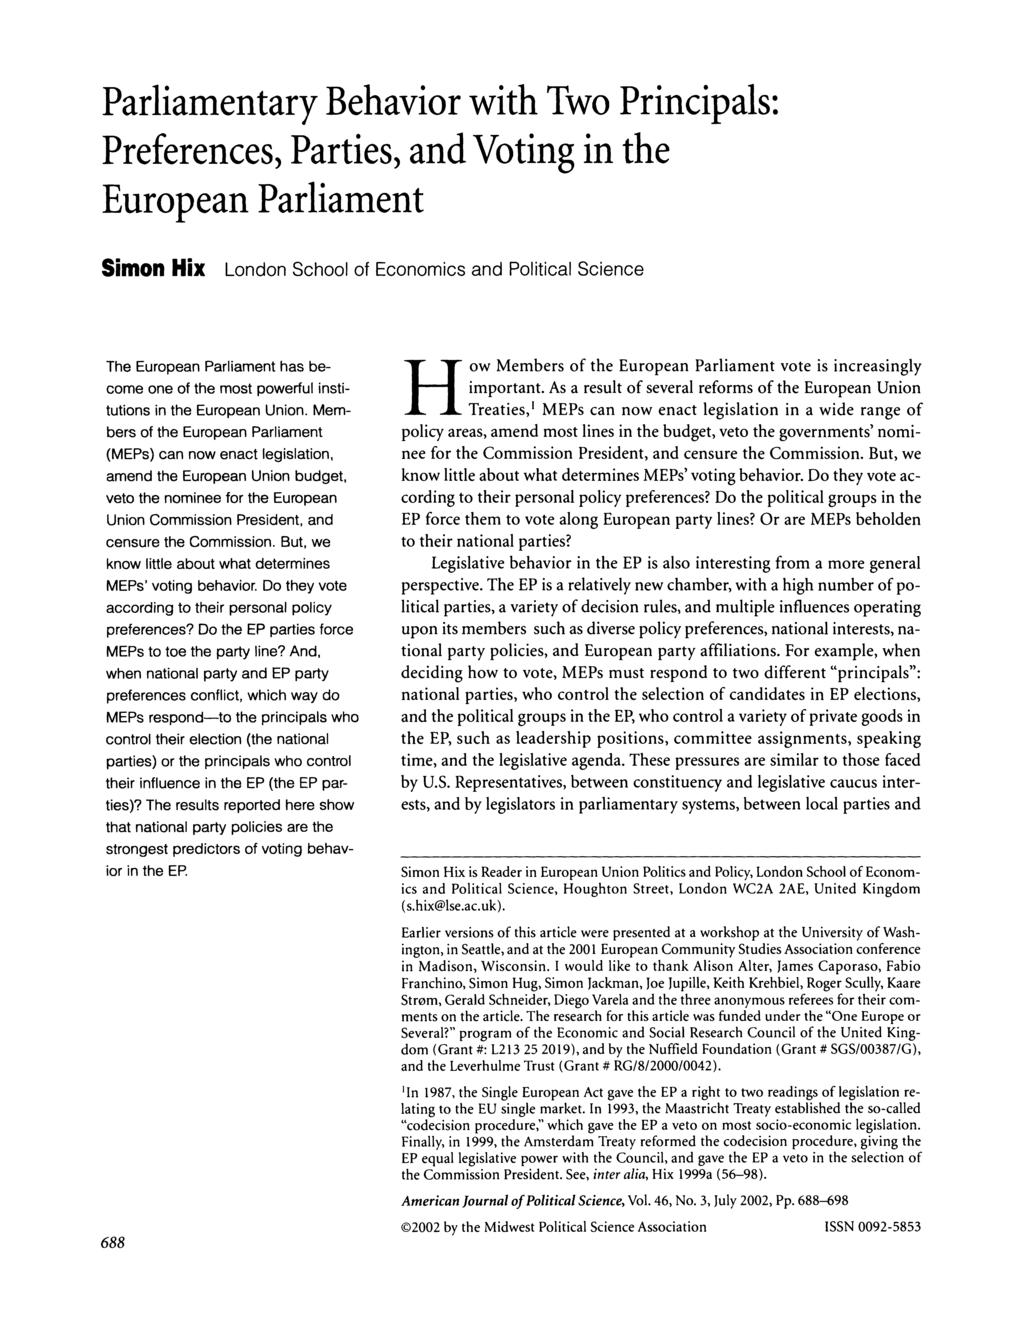 Parliamentary Behavior with Two Principals: Preferences, Parties, and Voting in the European Parliament Simon Hix London School of Economics and Political Science The European Parliament has become